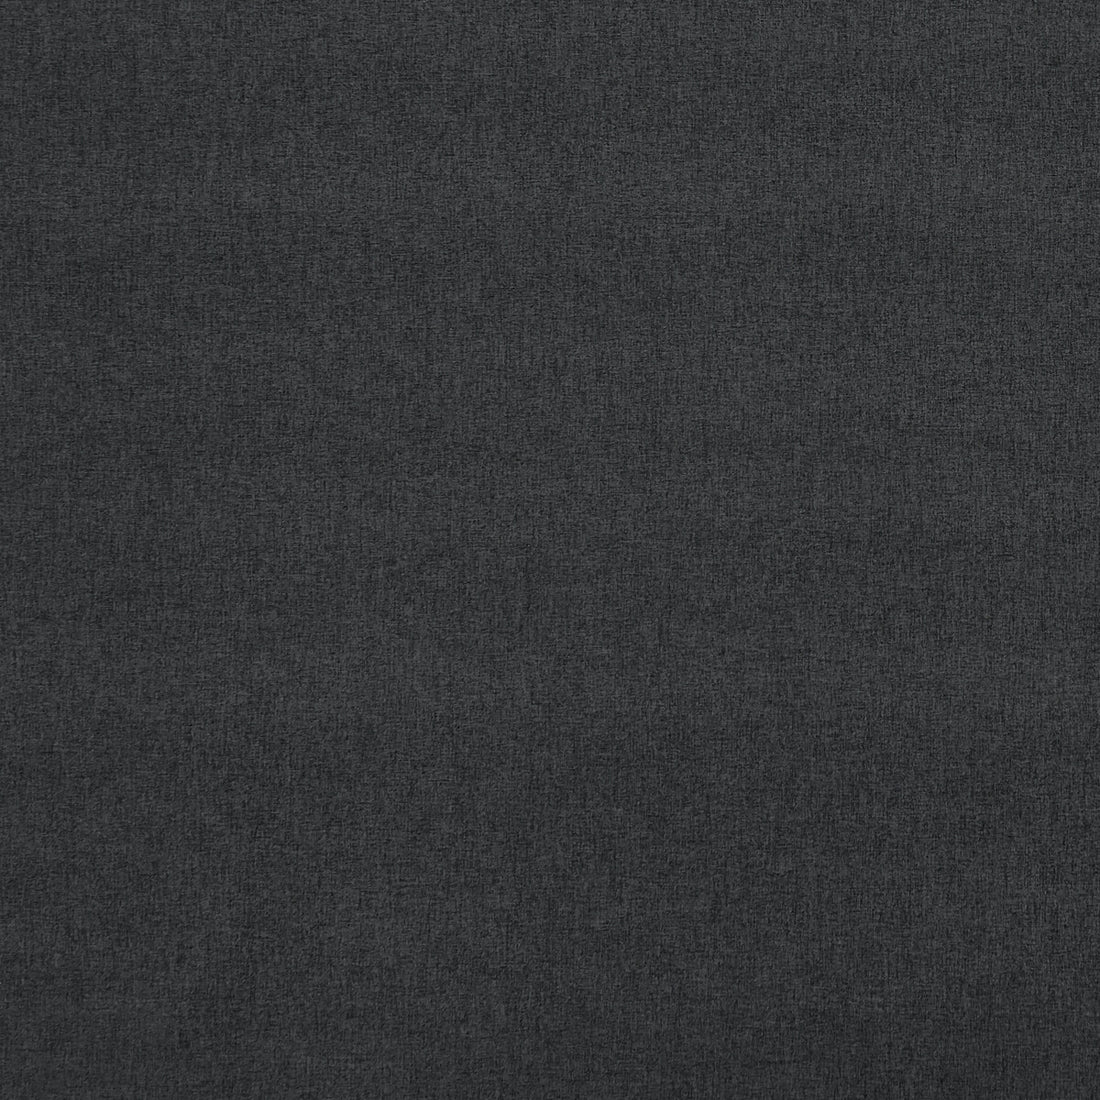 Highlander fabric in ebony color - pattern F0848/10.CAC.0 - by Clarke And Clarke in the Clarke &amp; Clarke Highlander collection